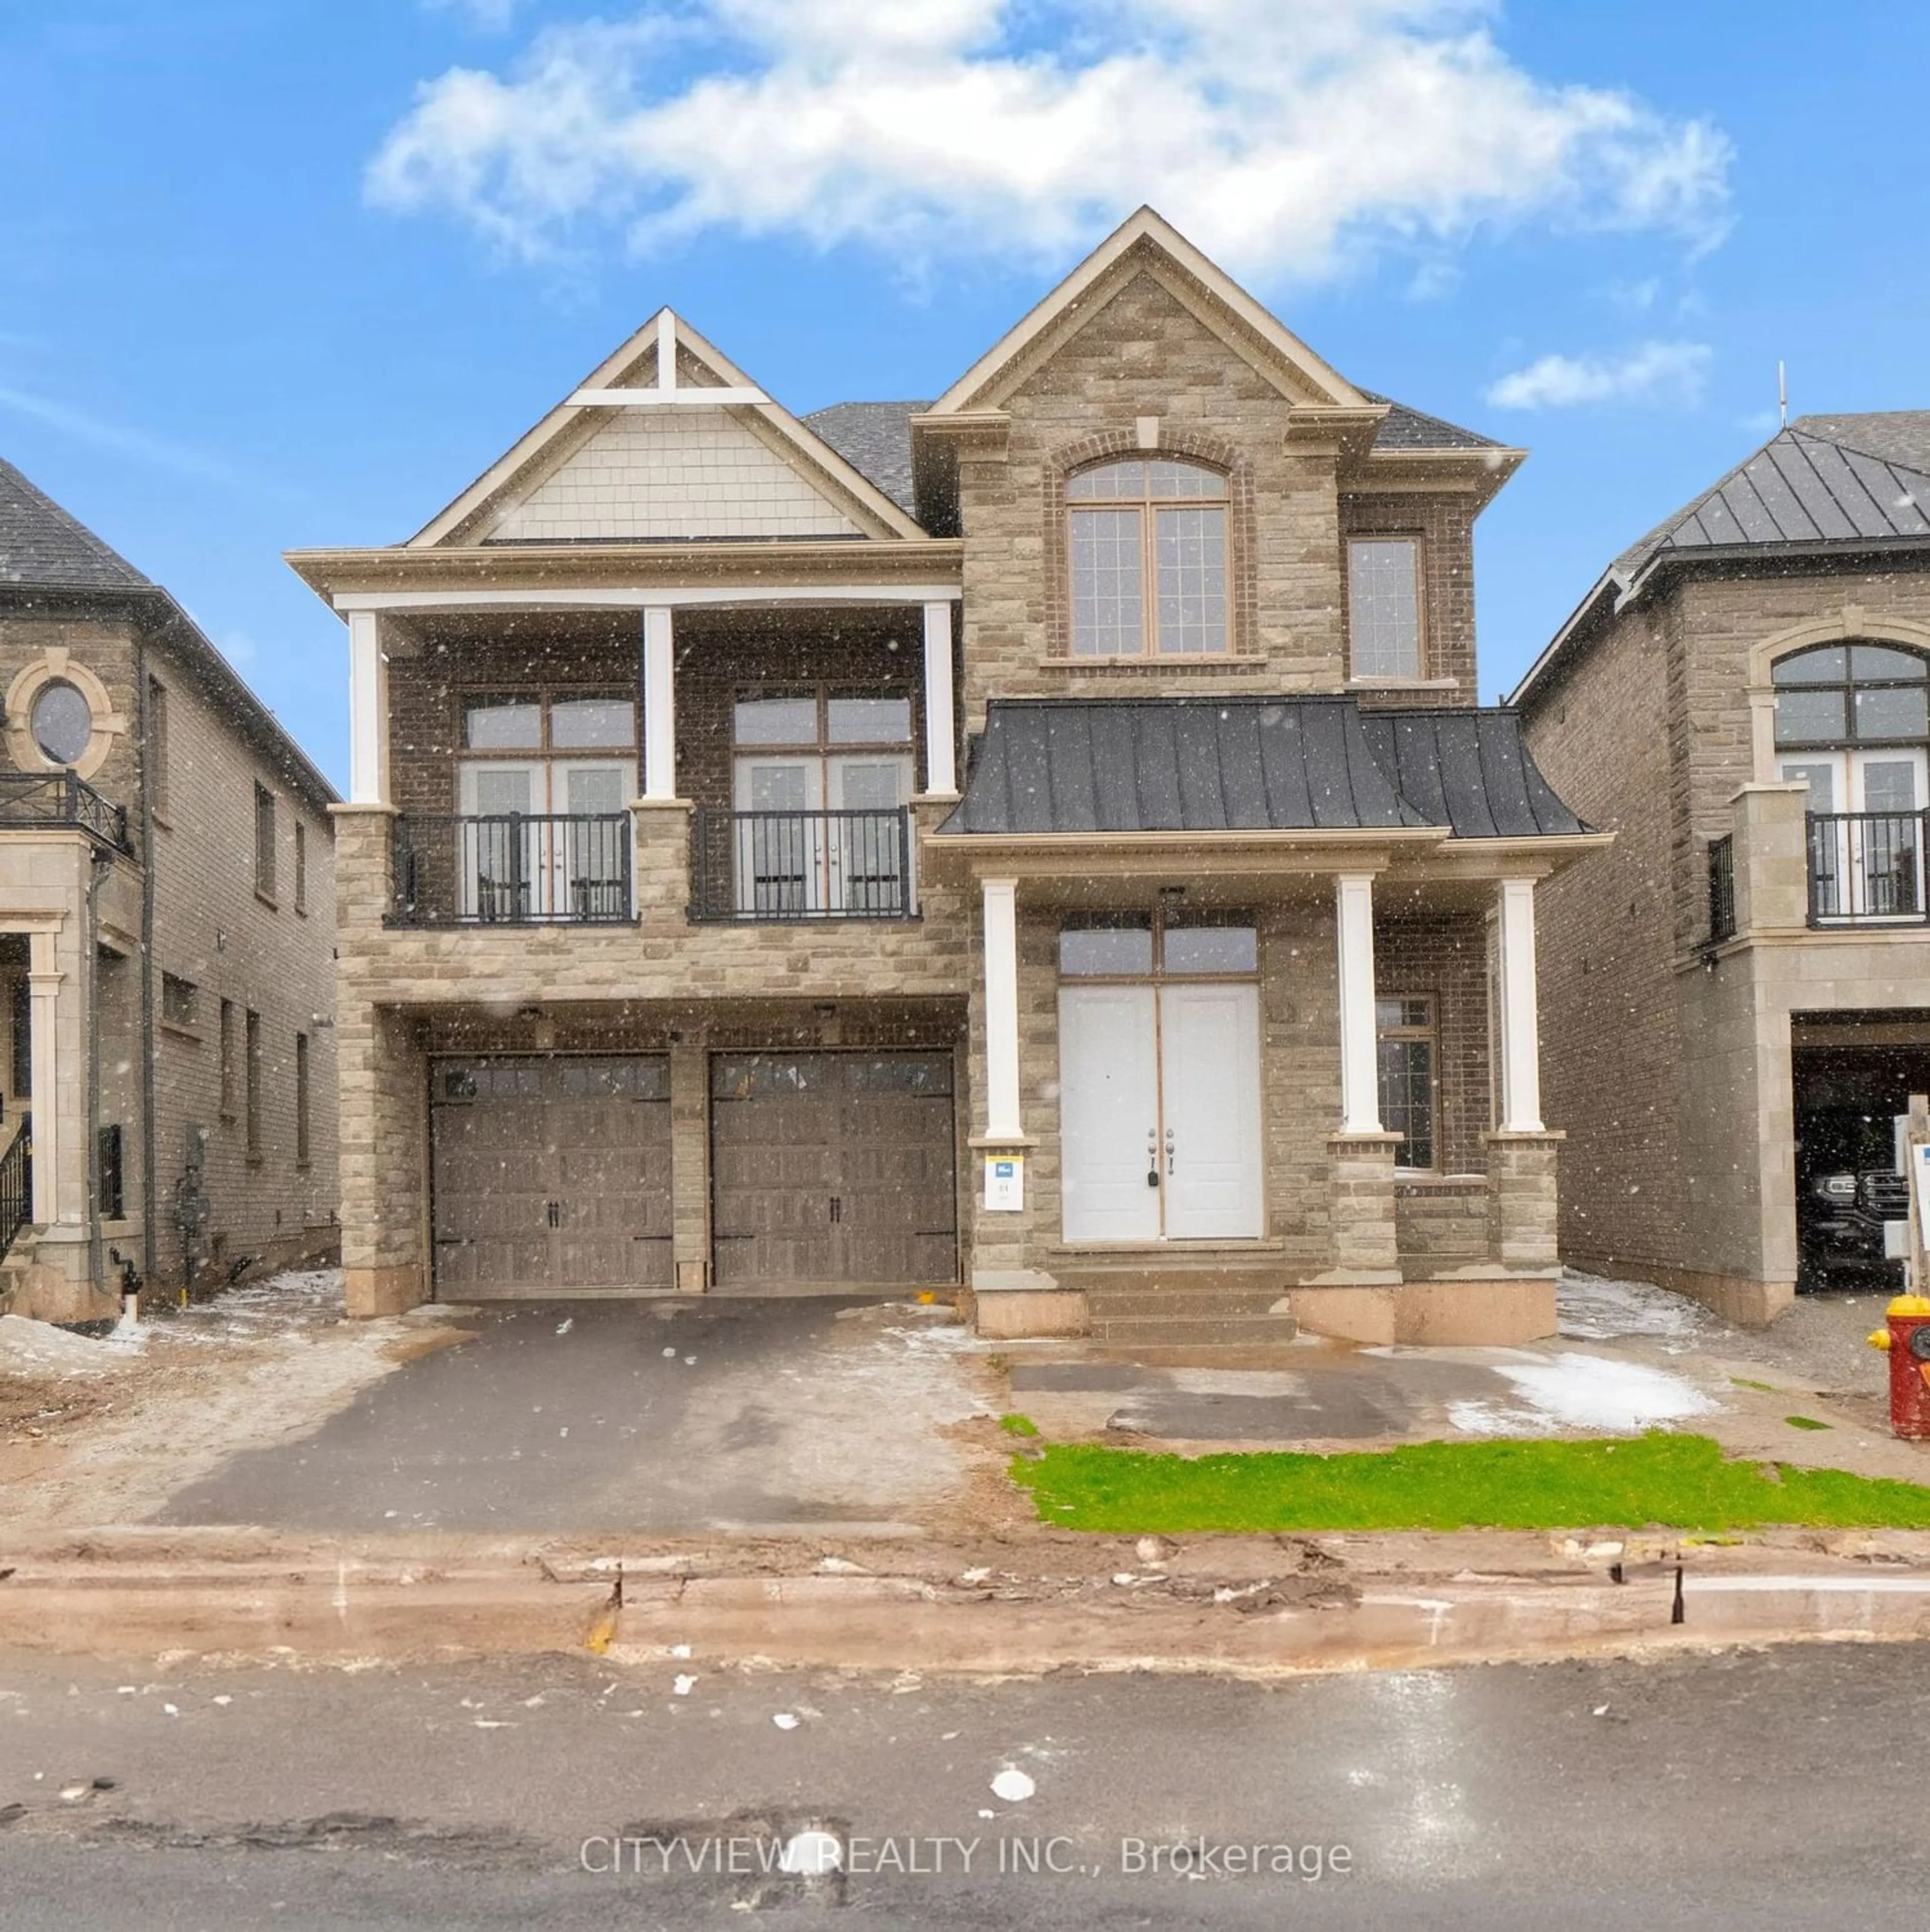 Home with stone exterior material for 22 Settlers Rd, Oakville Ontario L6H 7C6